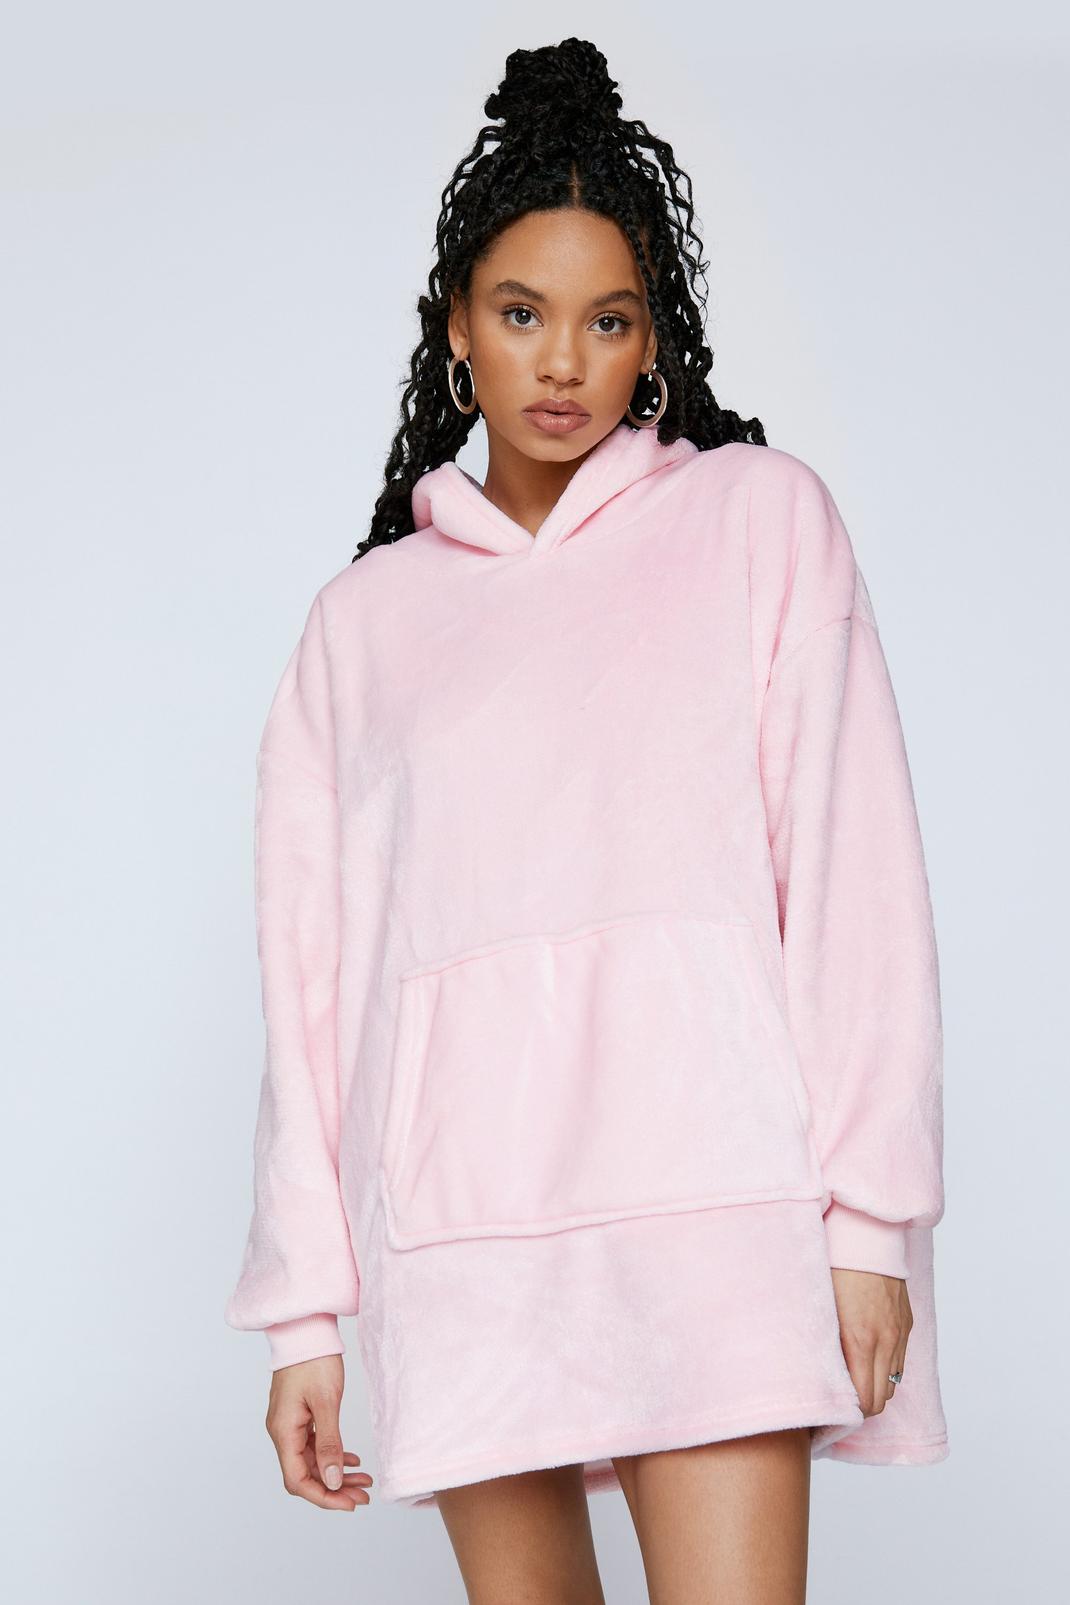 Robe sweat en polaire à capuche, Baby pink image number 1